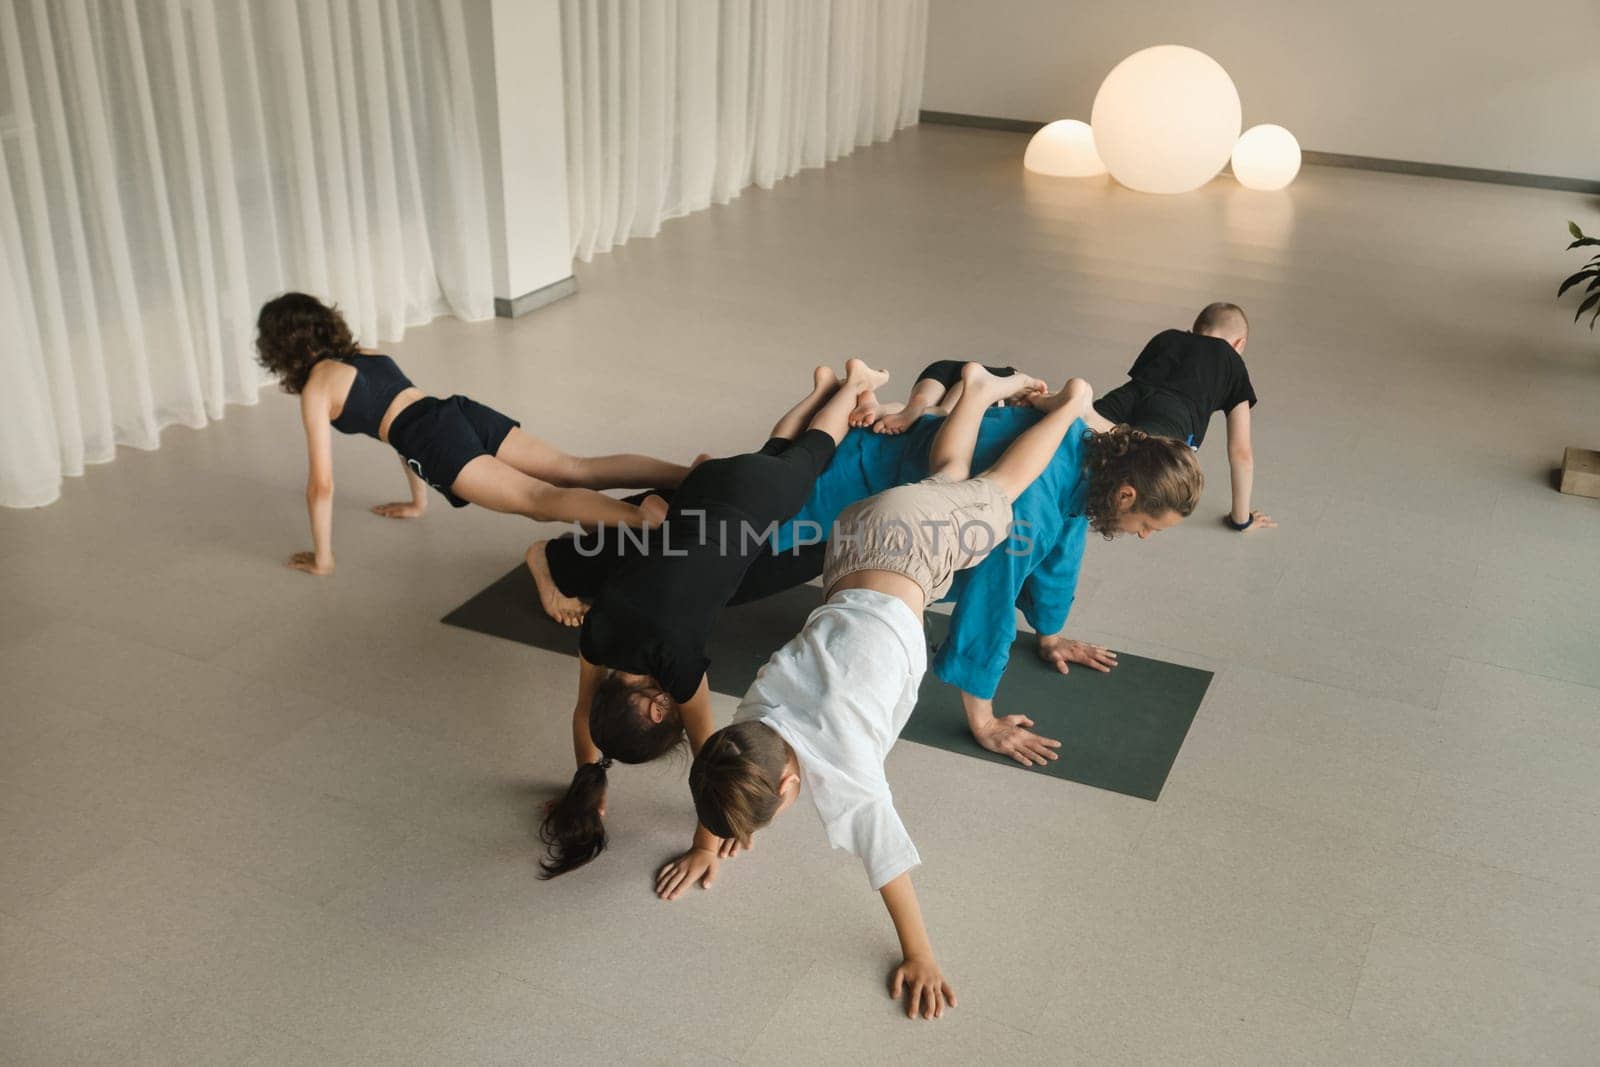 A team of children and a coach do an unusual pose at an indoor yoga workout.